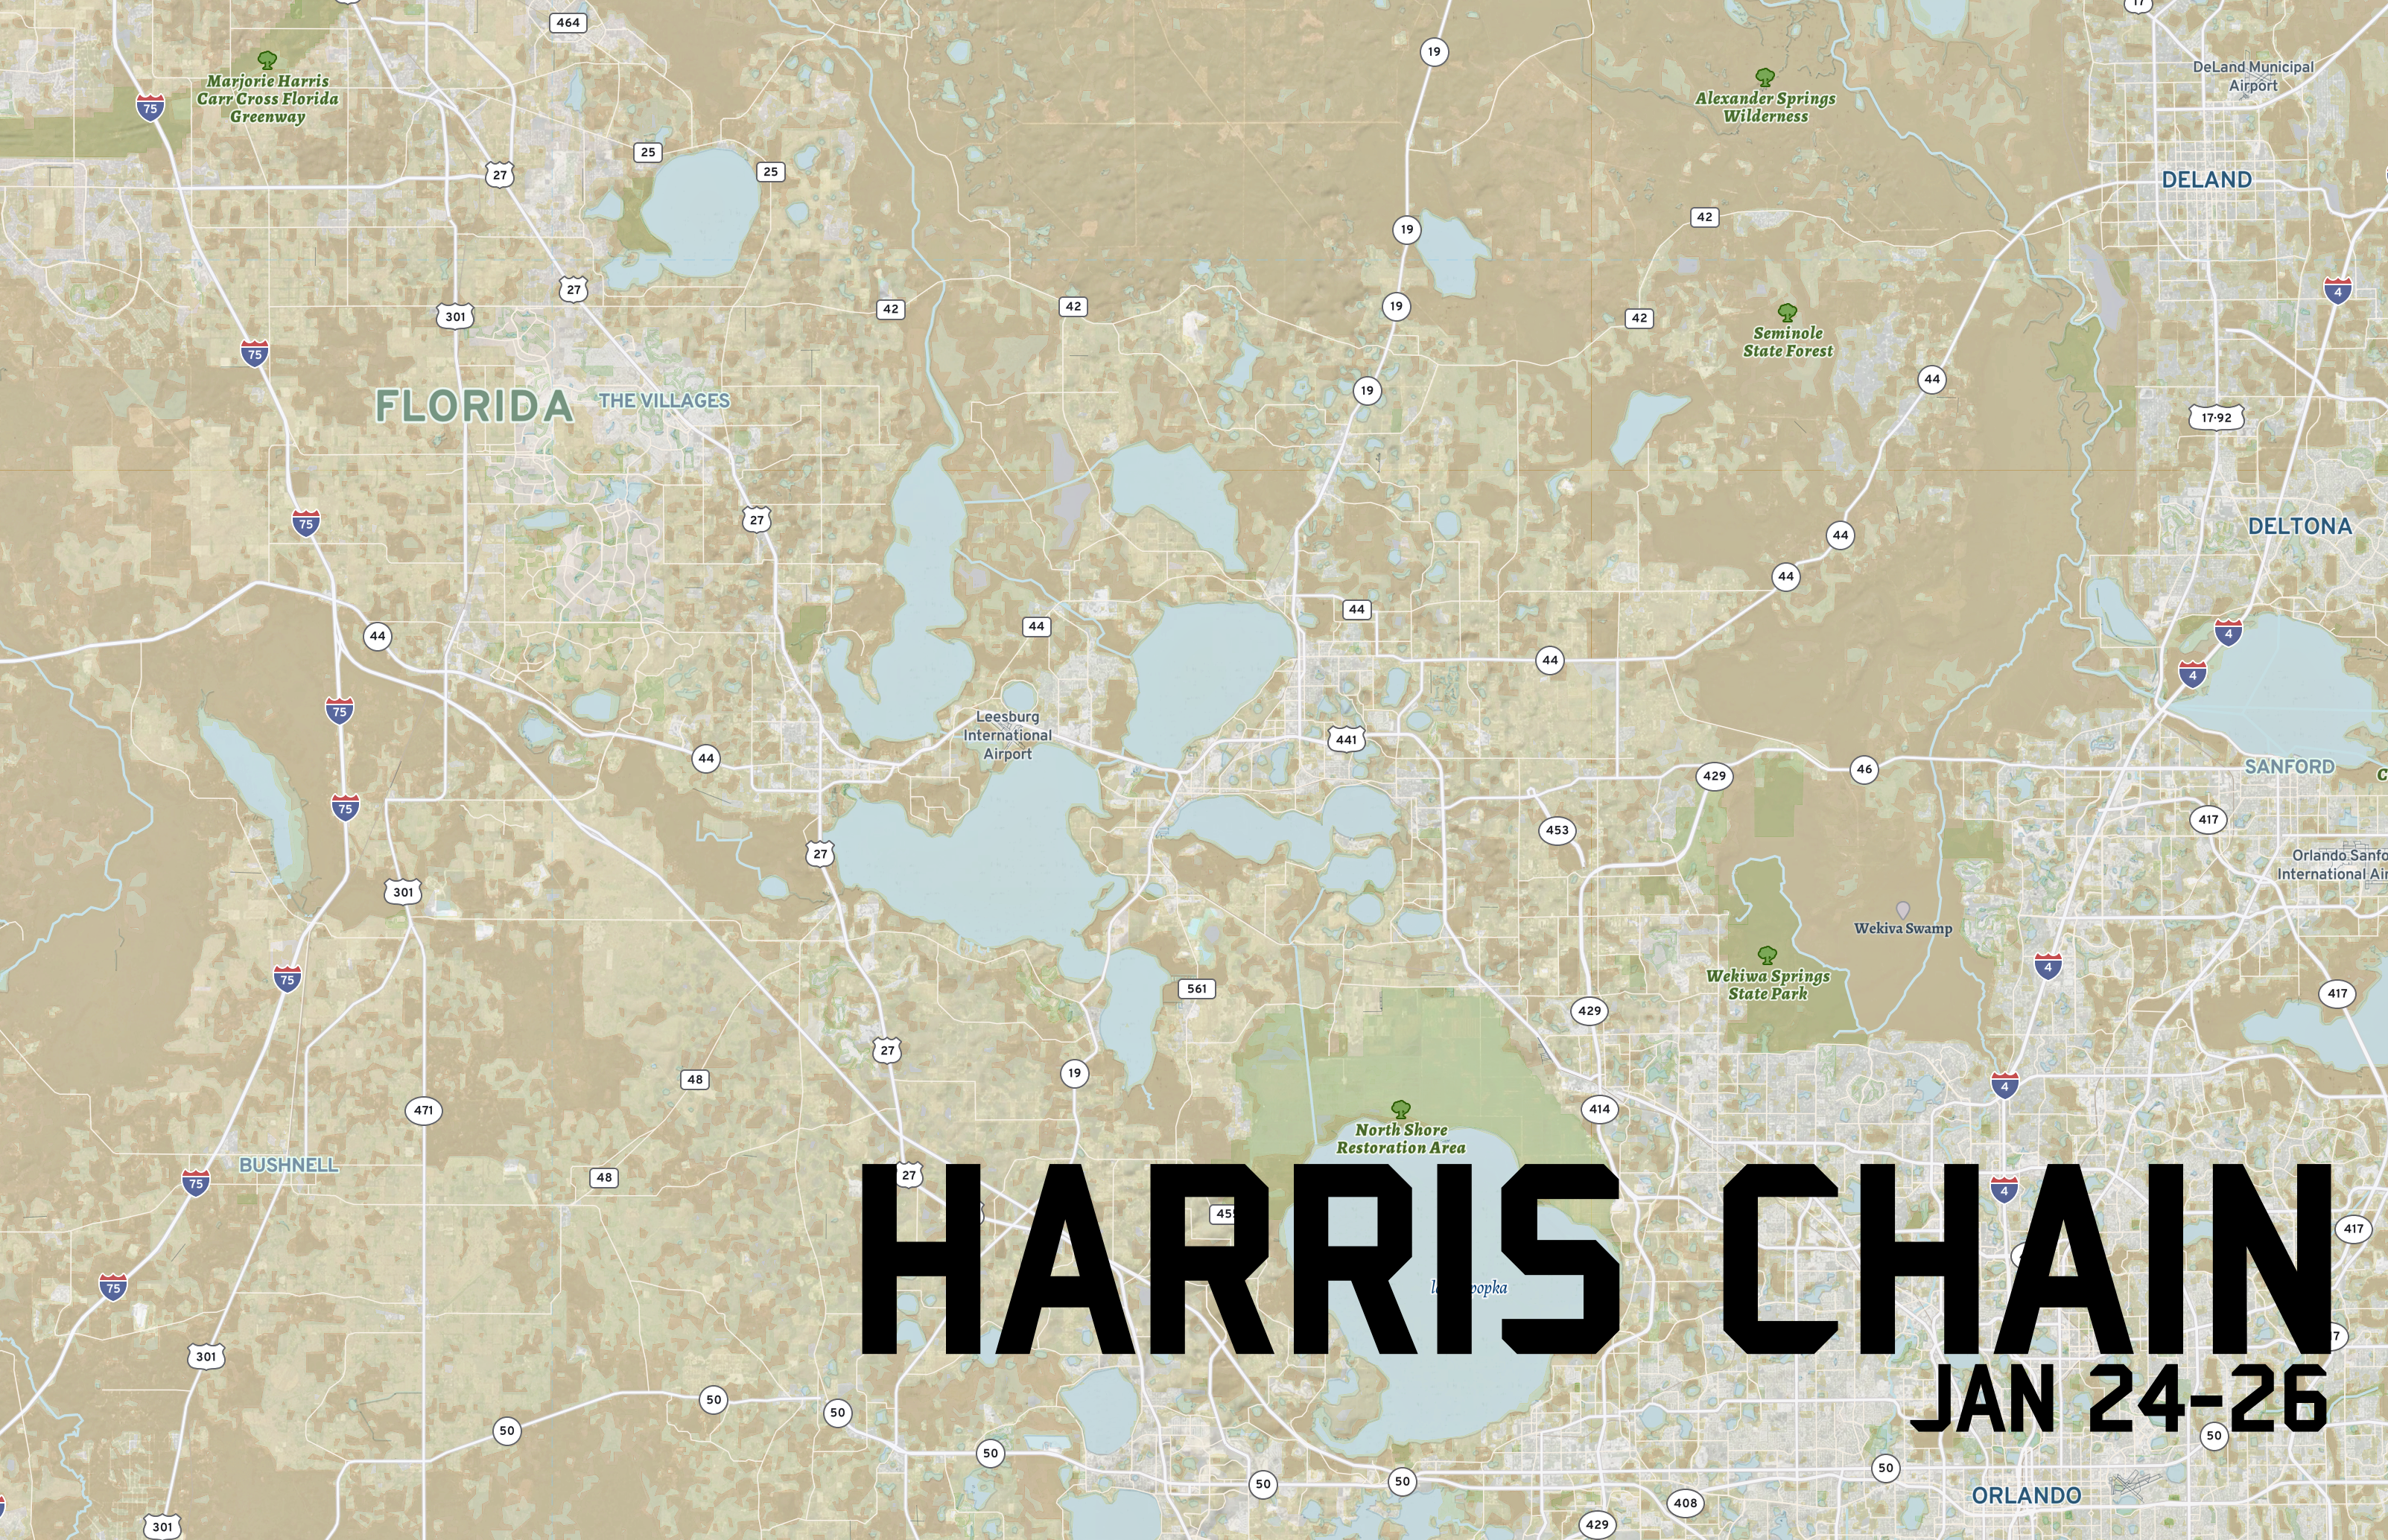 Starting with the Eastern Opens Division:<br>
<h4>Harris Chain of Lakes â Leesburg, Fla.</h4>
